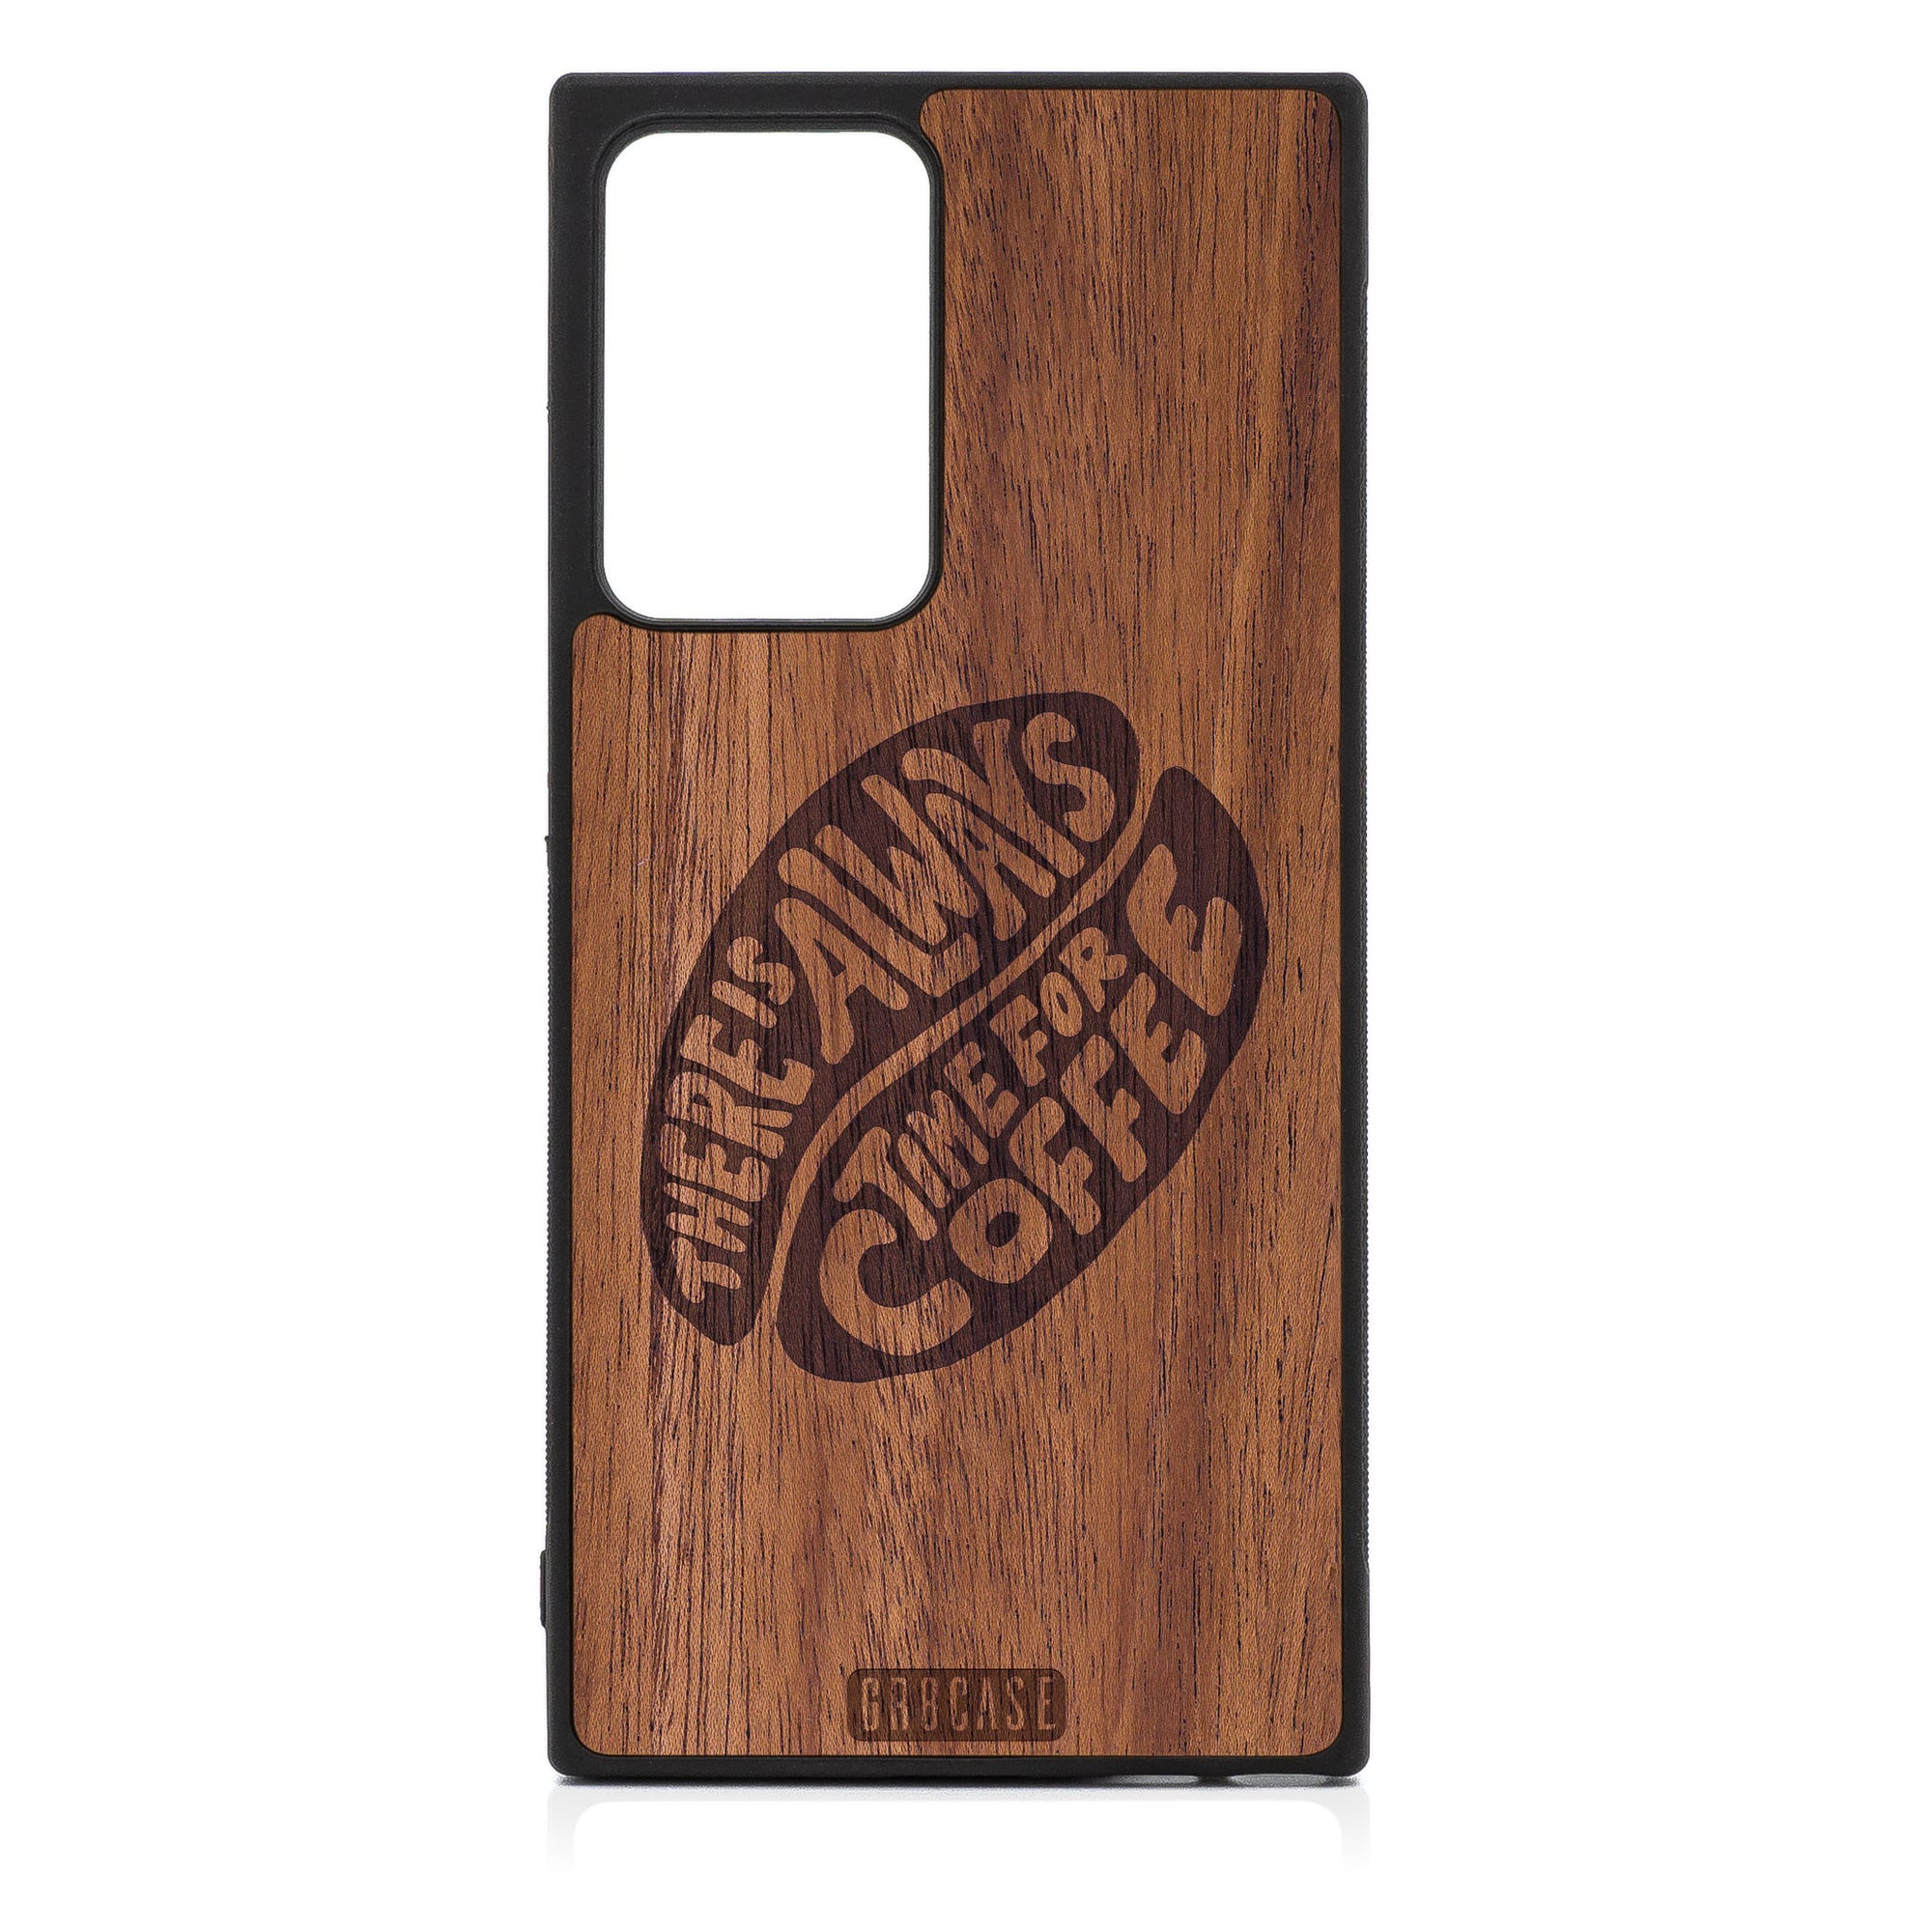 There Is Always Time For Coffee Design Wood Case For Samsung Galaxy Note 20 Ultra